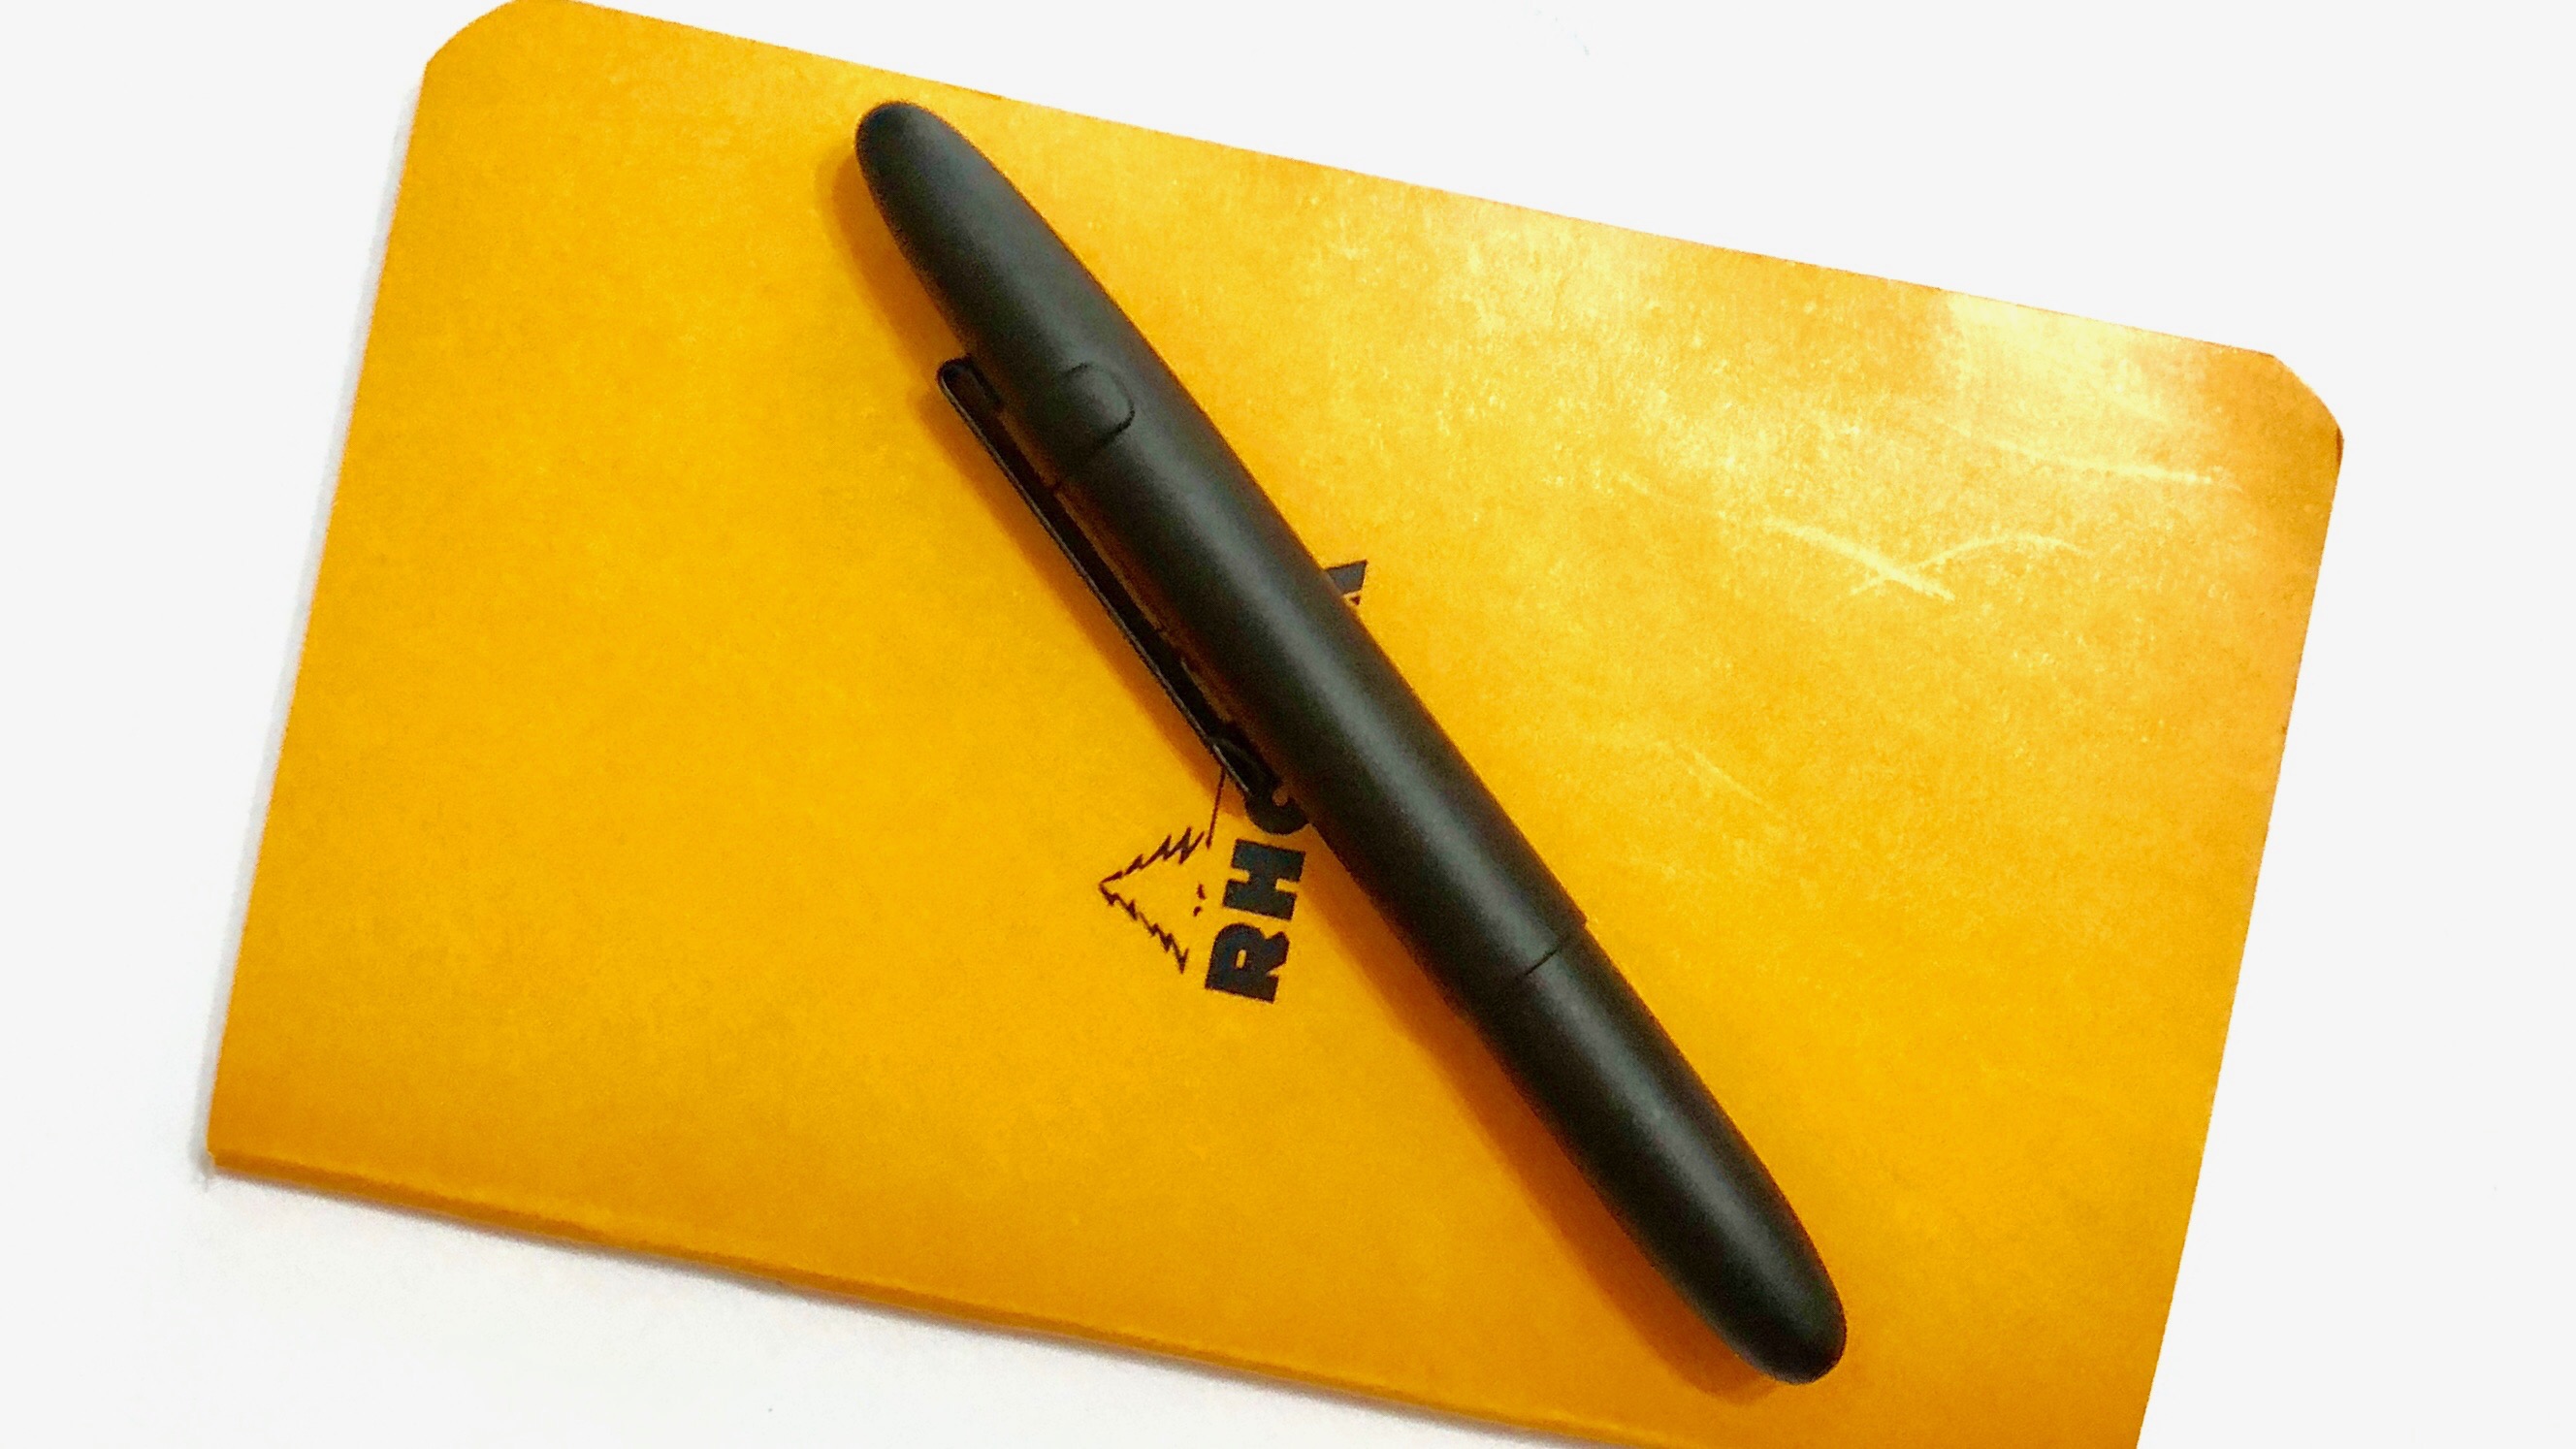 &ldquo;Rhodia A7 notebook with Fisher Bullet space pen&rdquo;